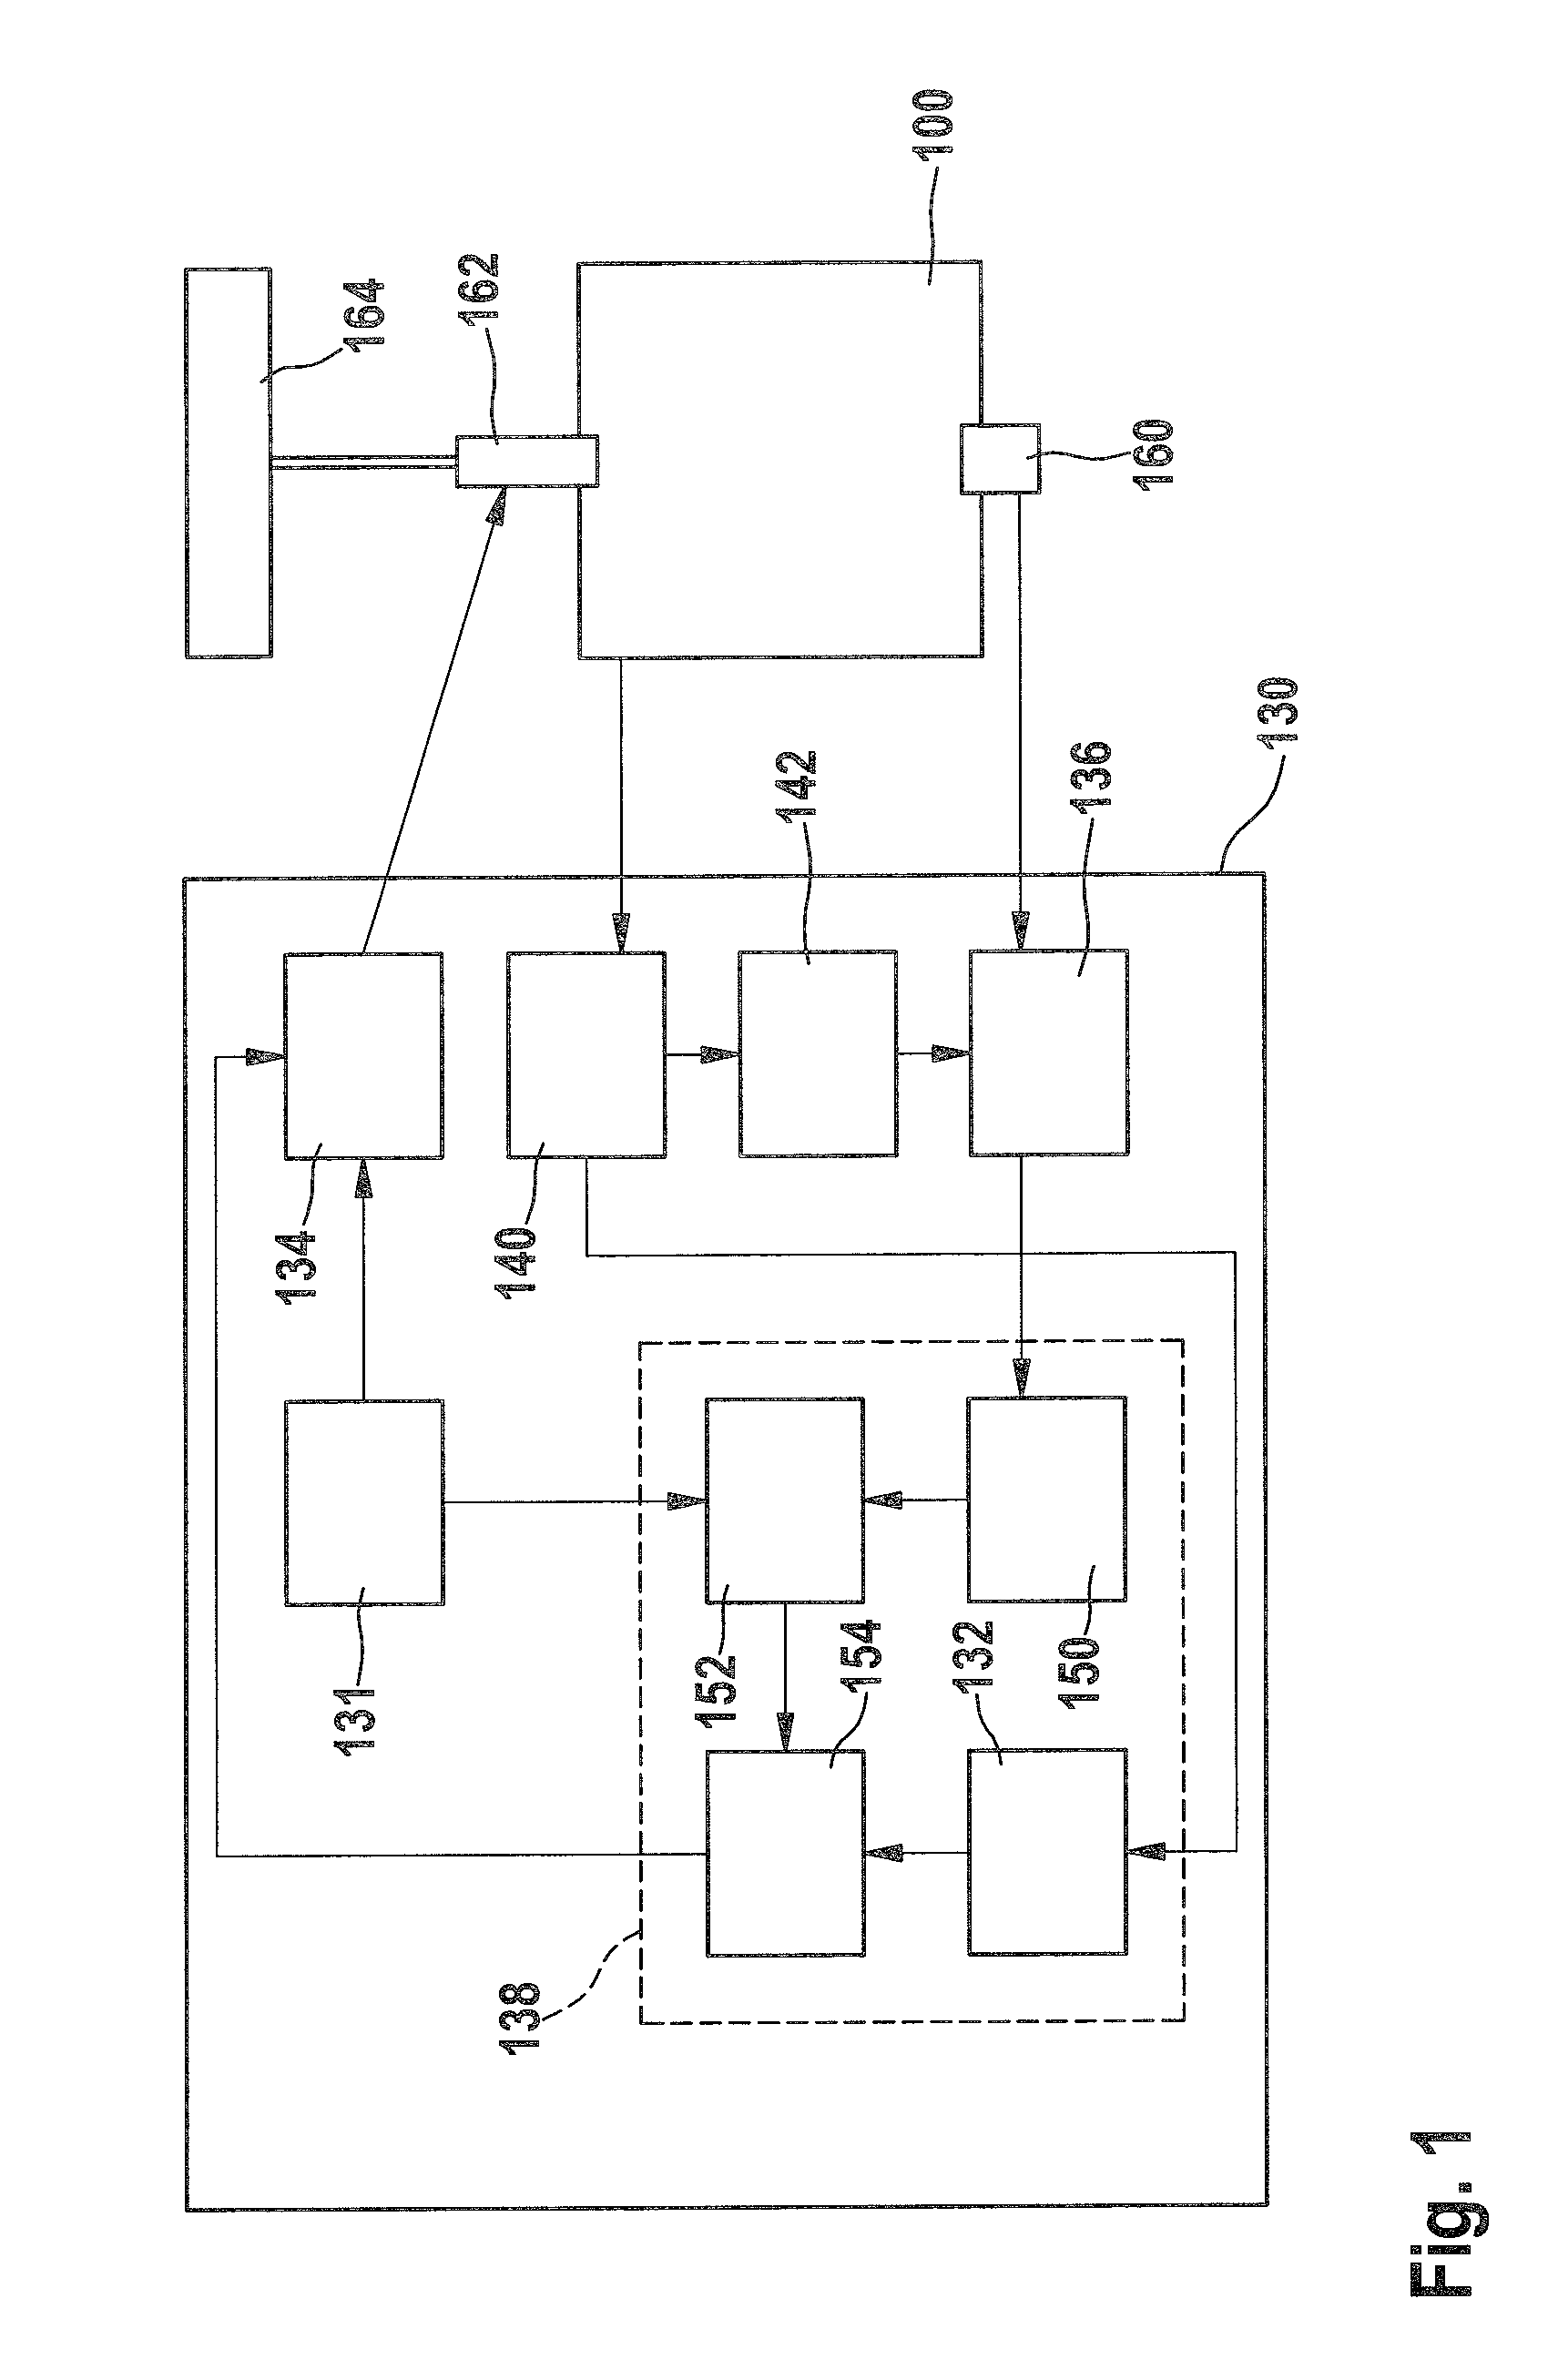 Method and control device for operating an internal combustion engine